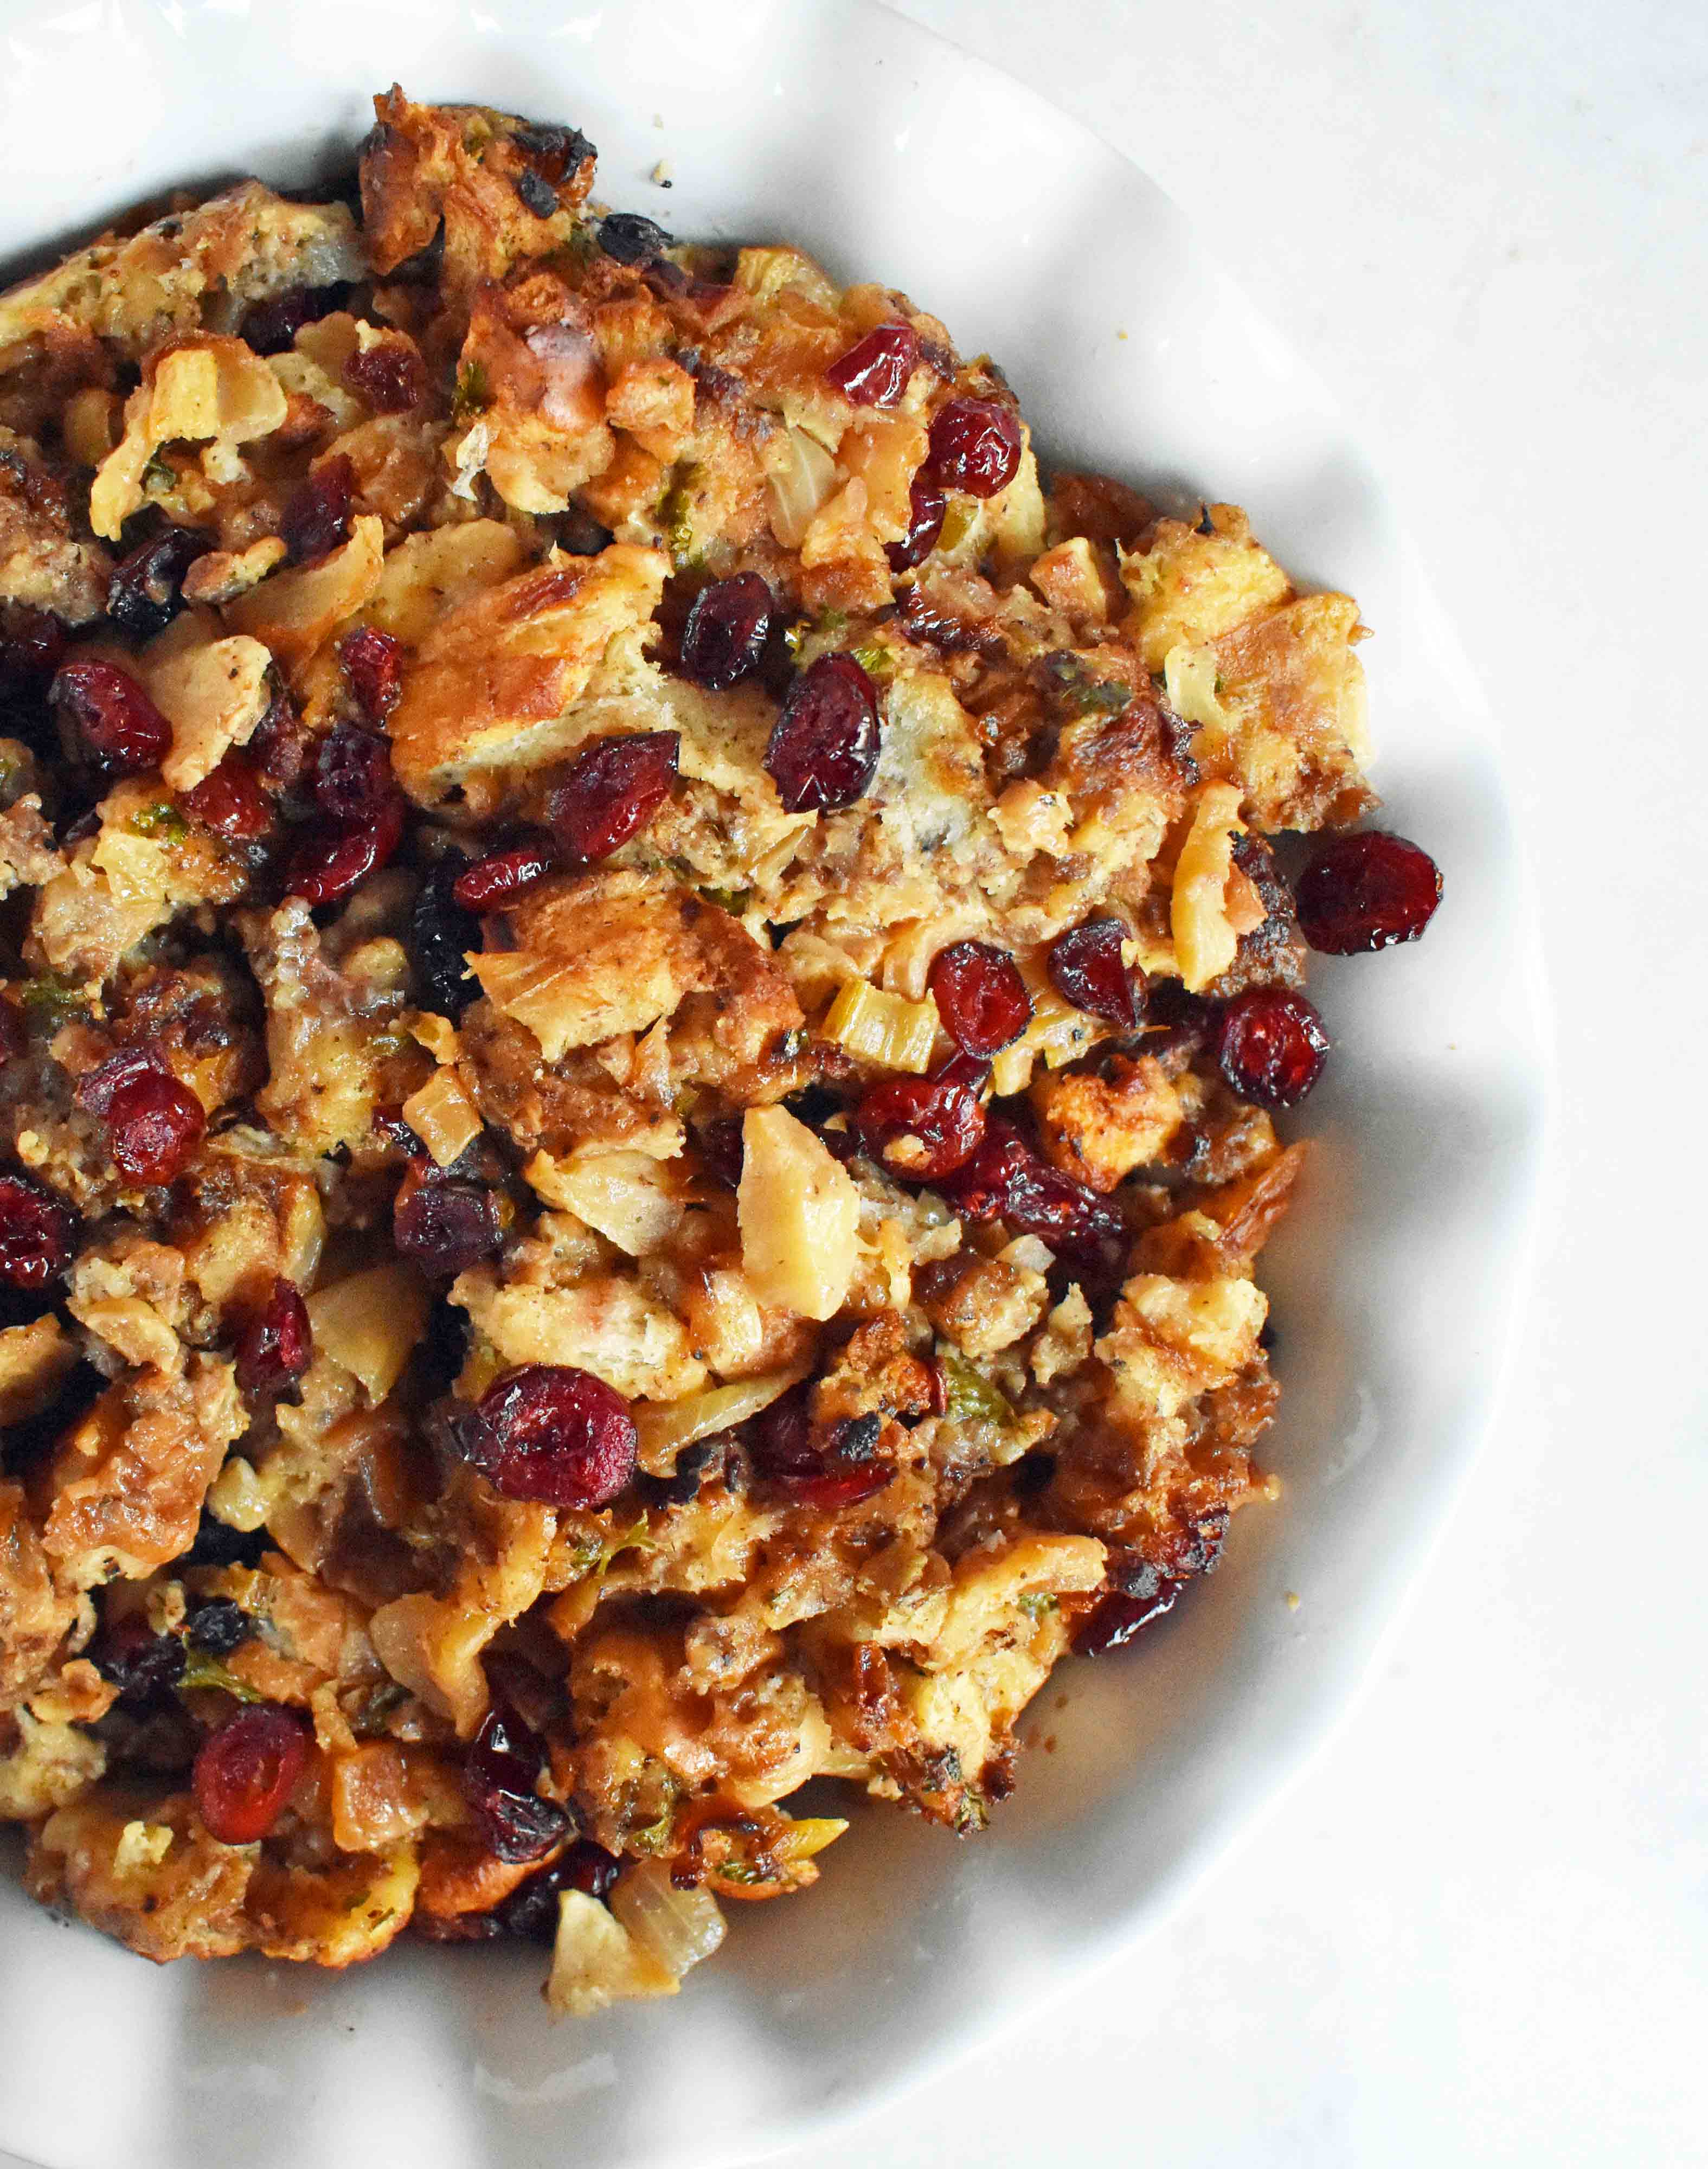 Cranberry Apple Sausage Stuffing by Modern Honey. Classic Bread Stuffing with Sausage, Dried Cranberries, and Crisp Apples. The perfect Thanksgiving side dish recipe!